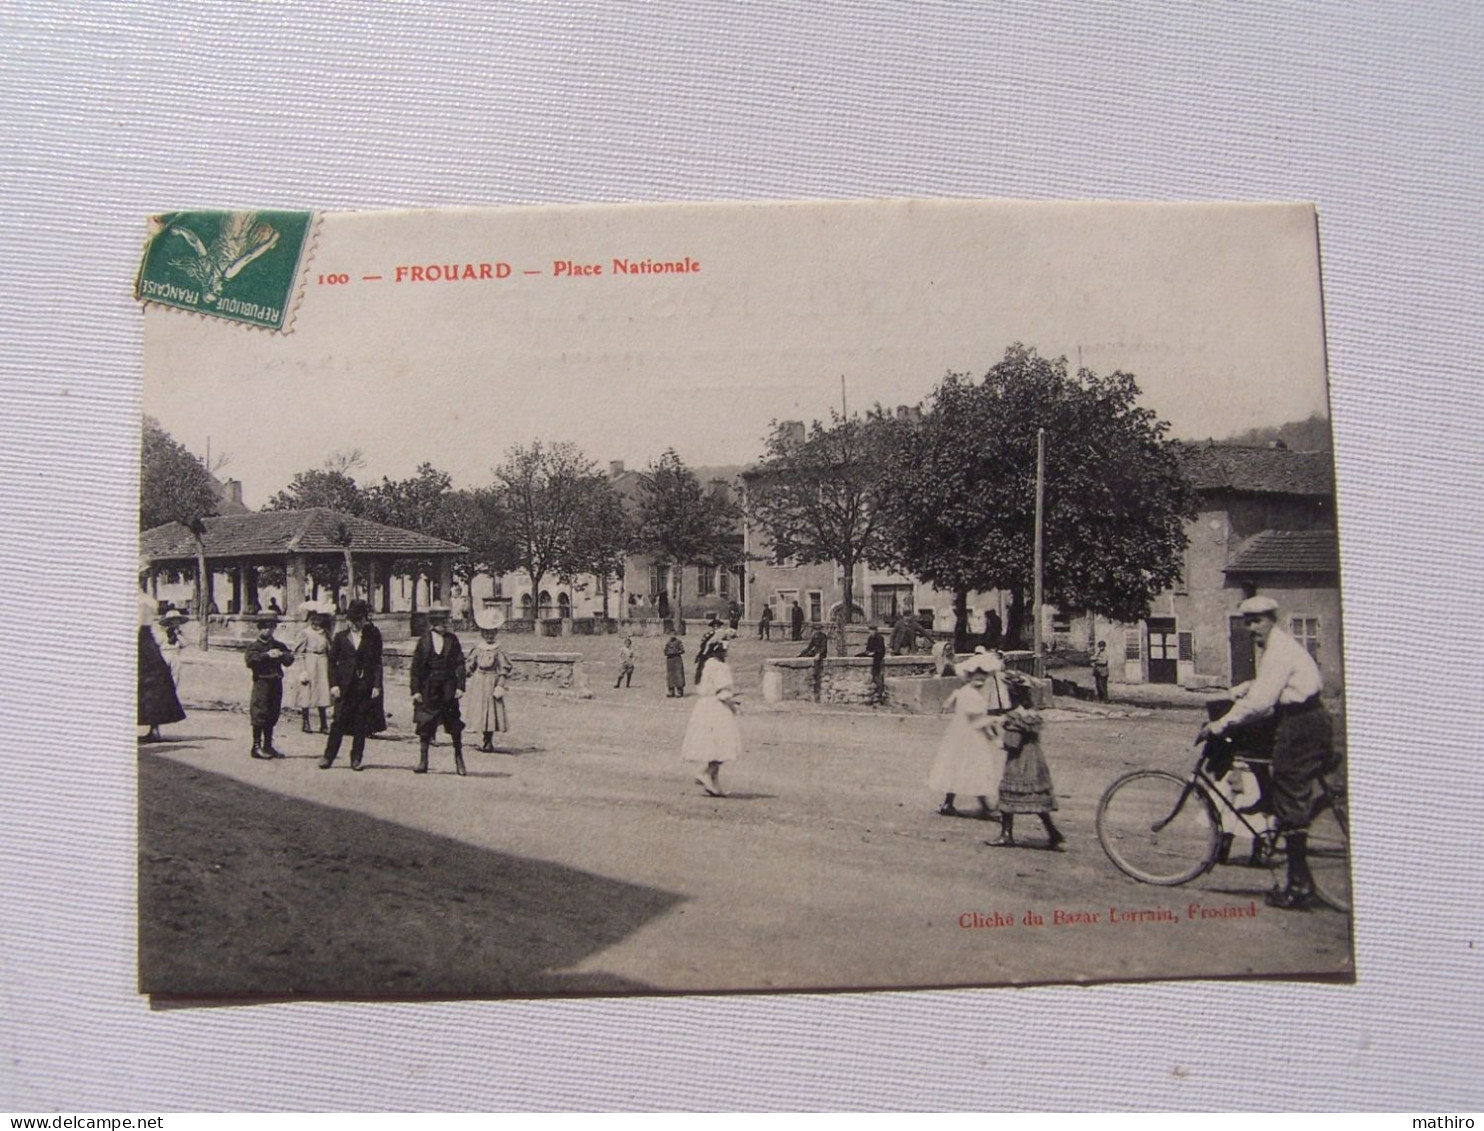 FROUARD - Place Nationale - Frouard